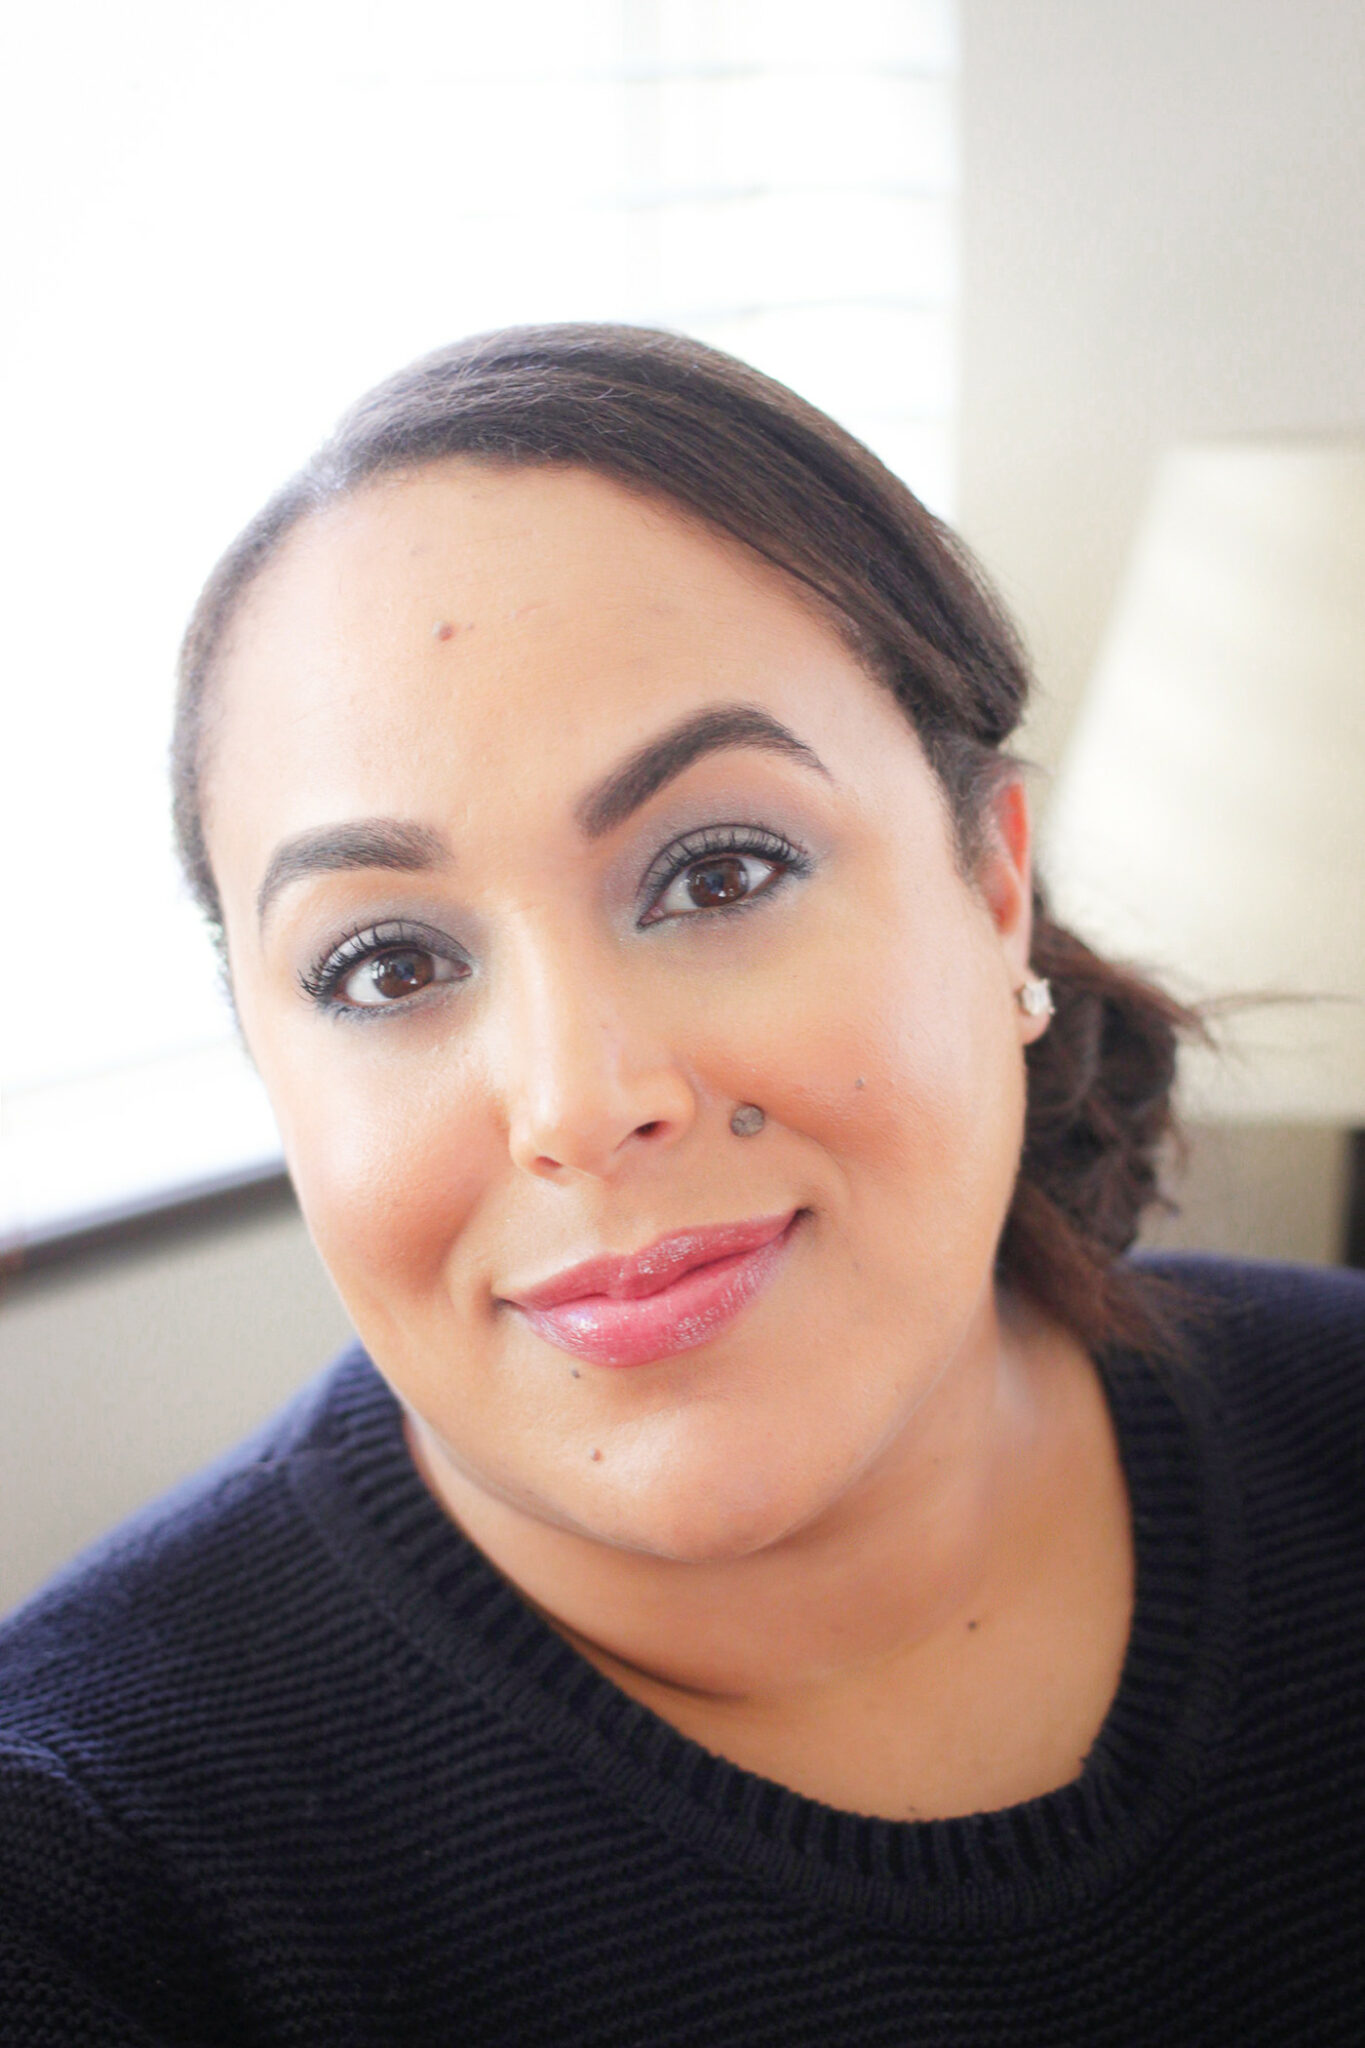 Tis the season to break out the sparkle and get glam. See how I am getting holiday ready in under 15 minutes with this easy holiday makeup tutorial!